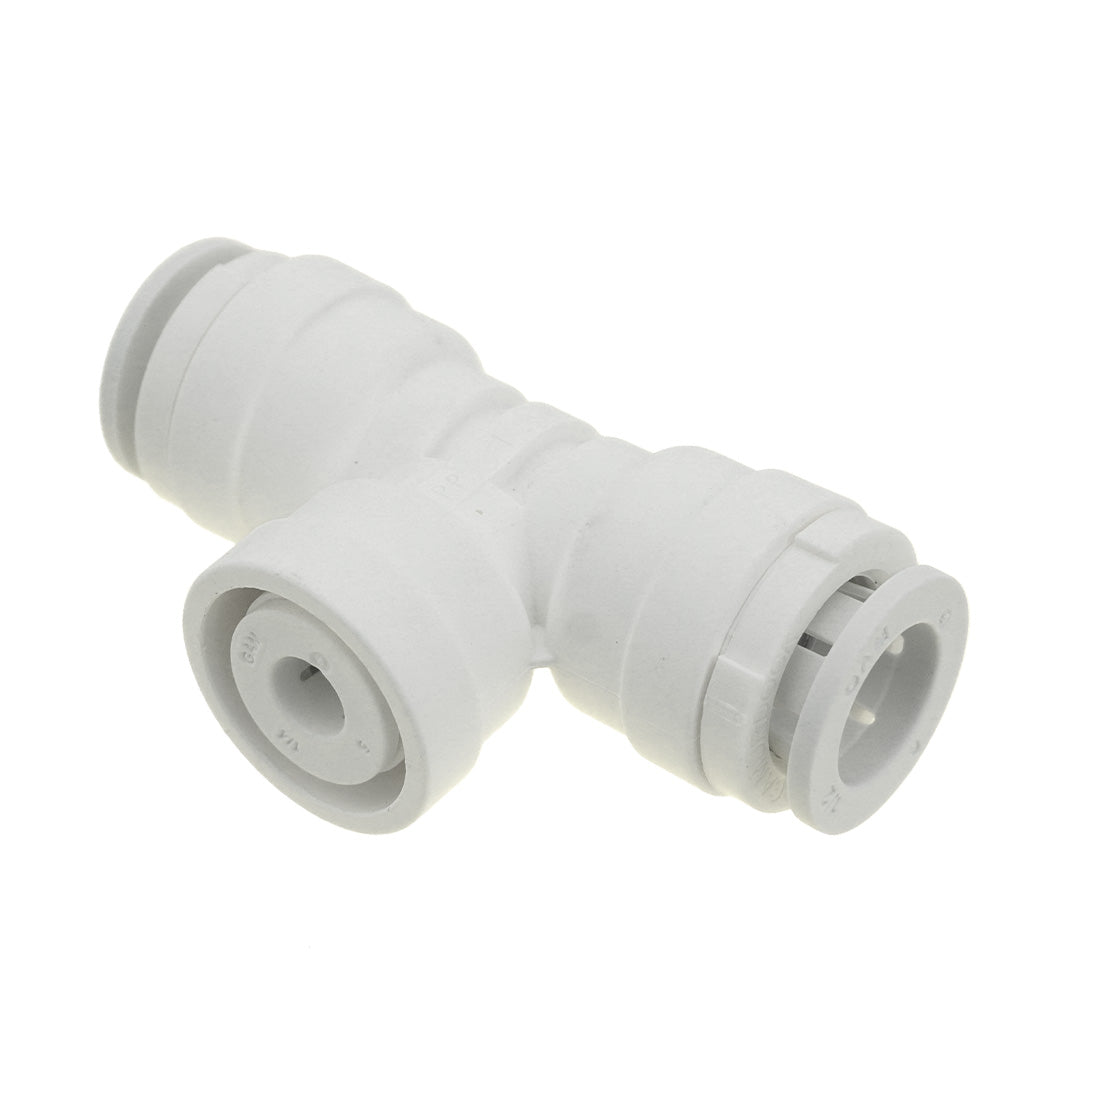 PWP Connector for TDS Meter Probes 1/2 Tube Size Right Angle View